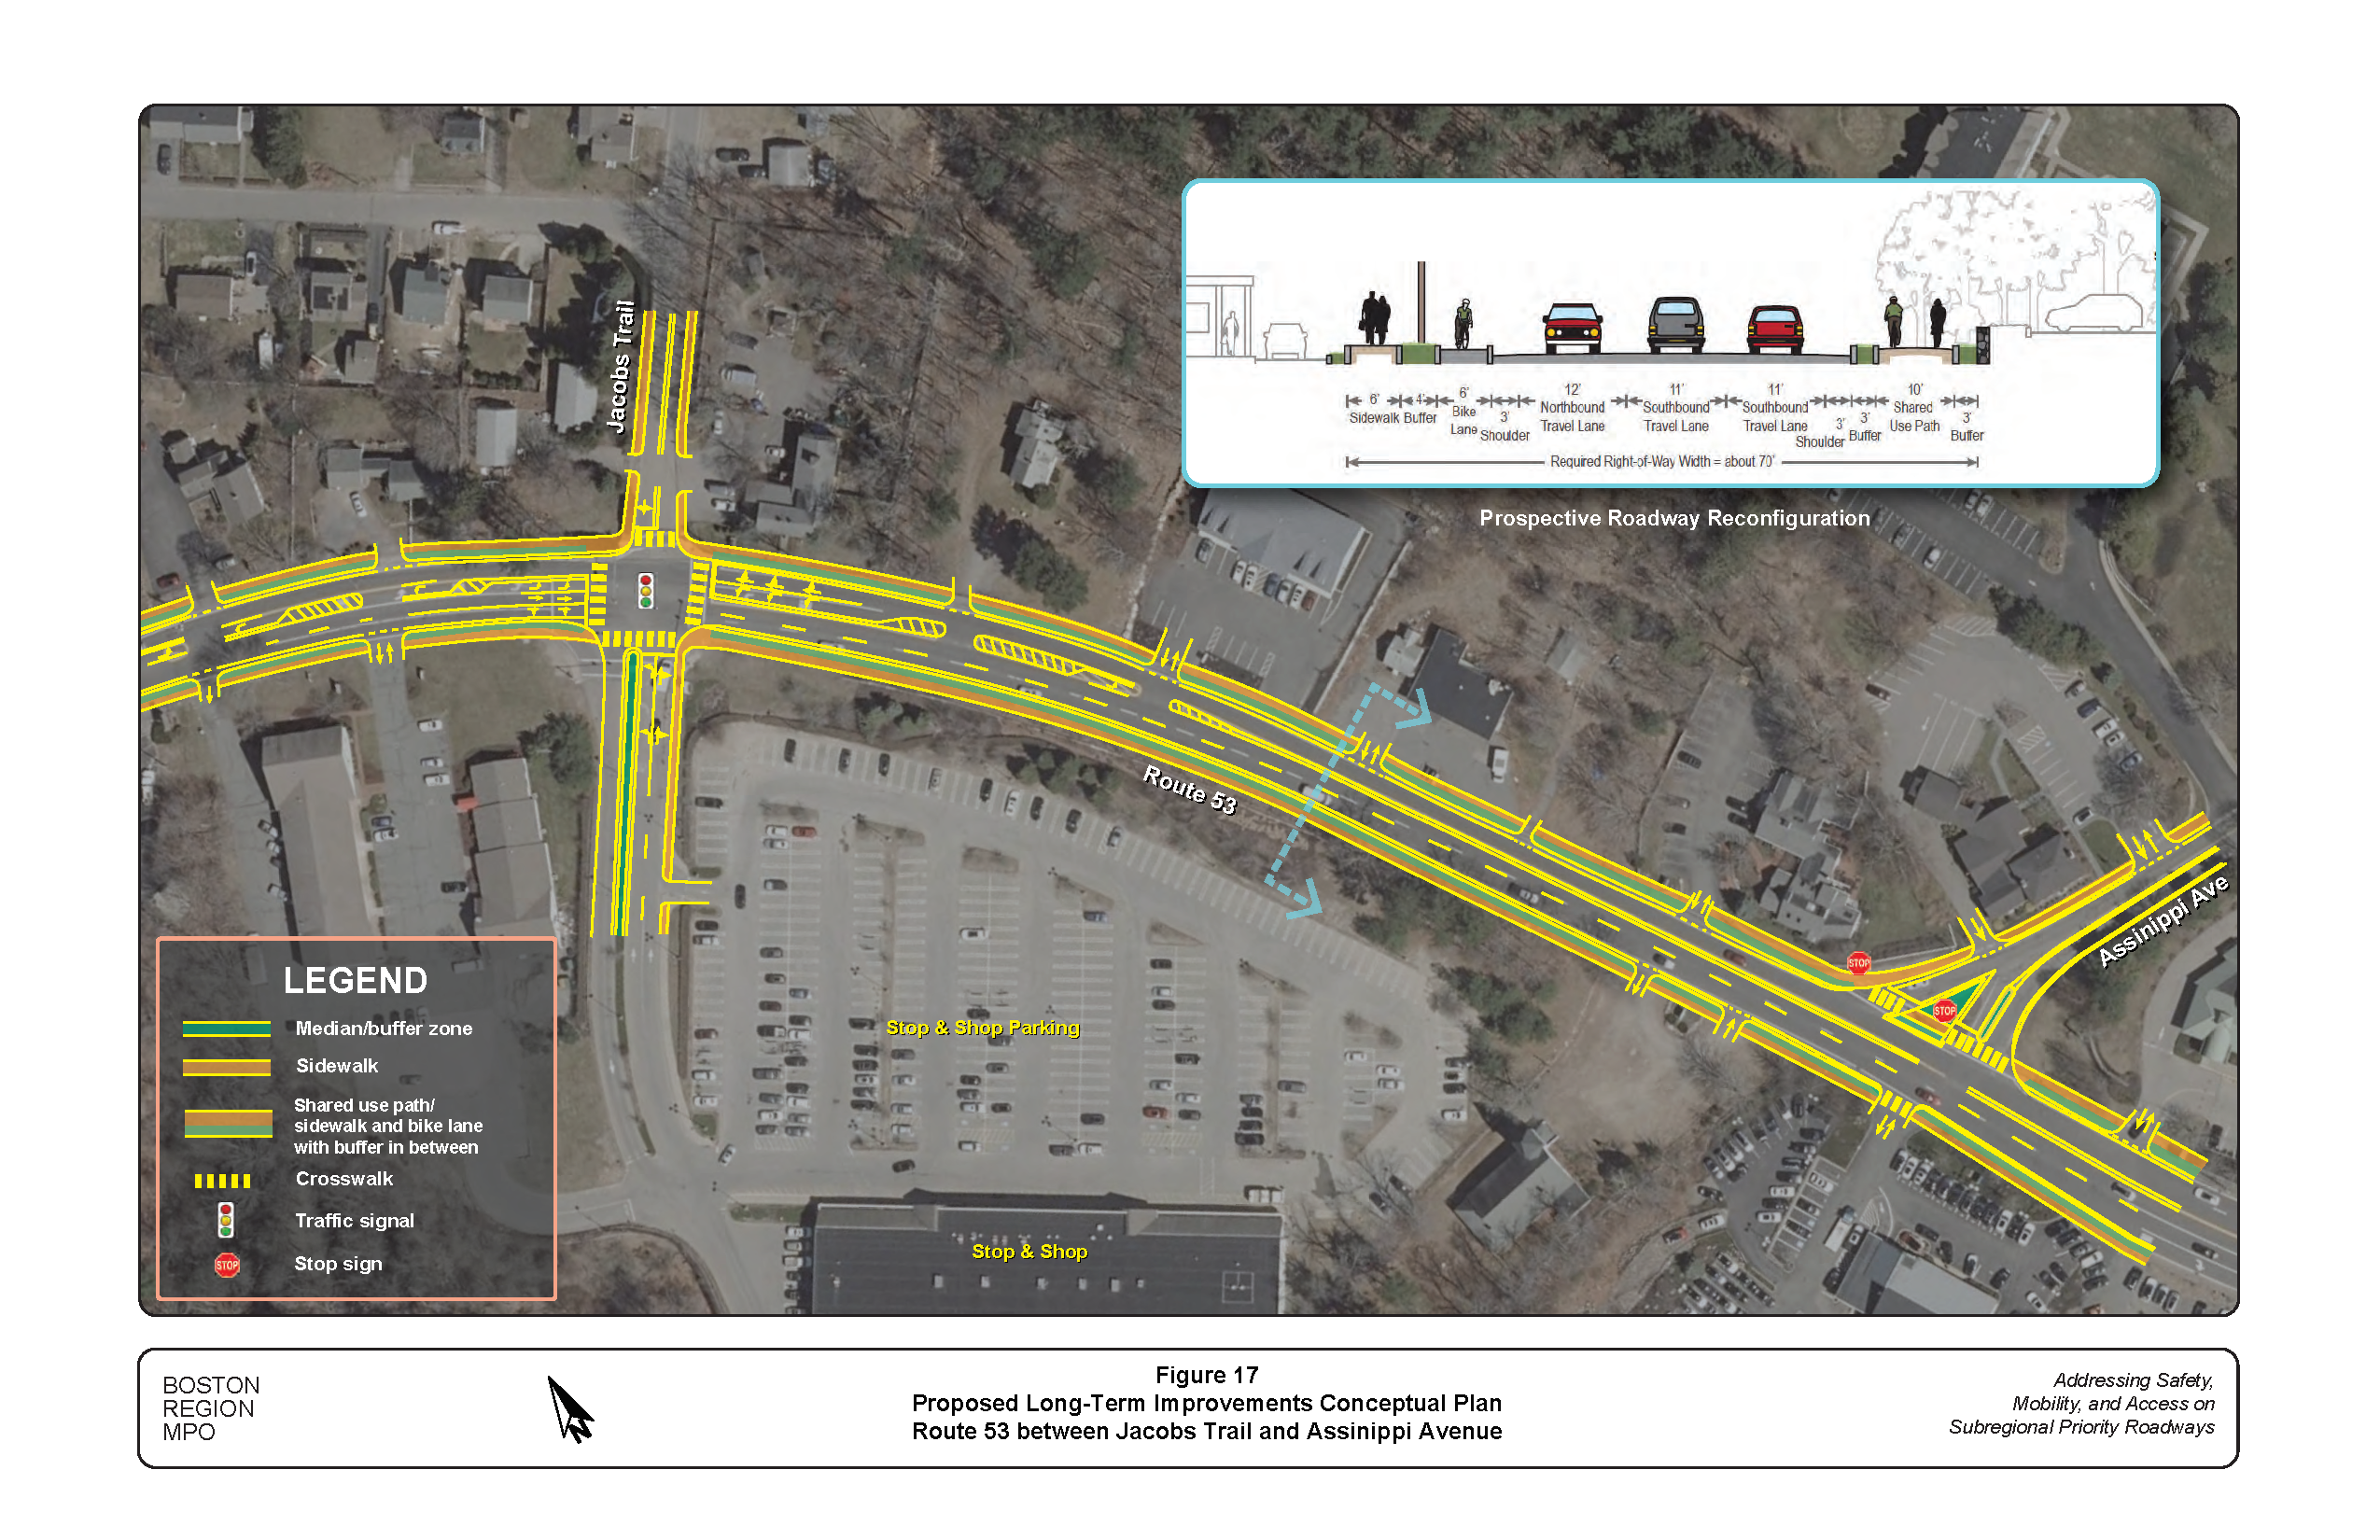 This figure shows a conceptual plan of the proposed long-term improvements in the Route 53 section from Jacobs Trial to Assinippi Avenue.